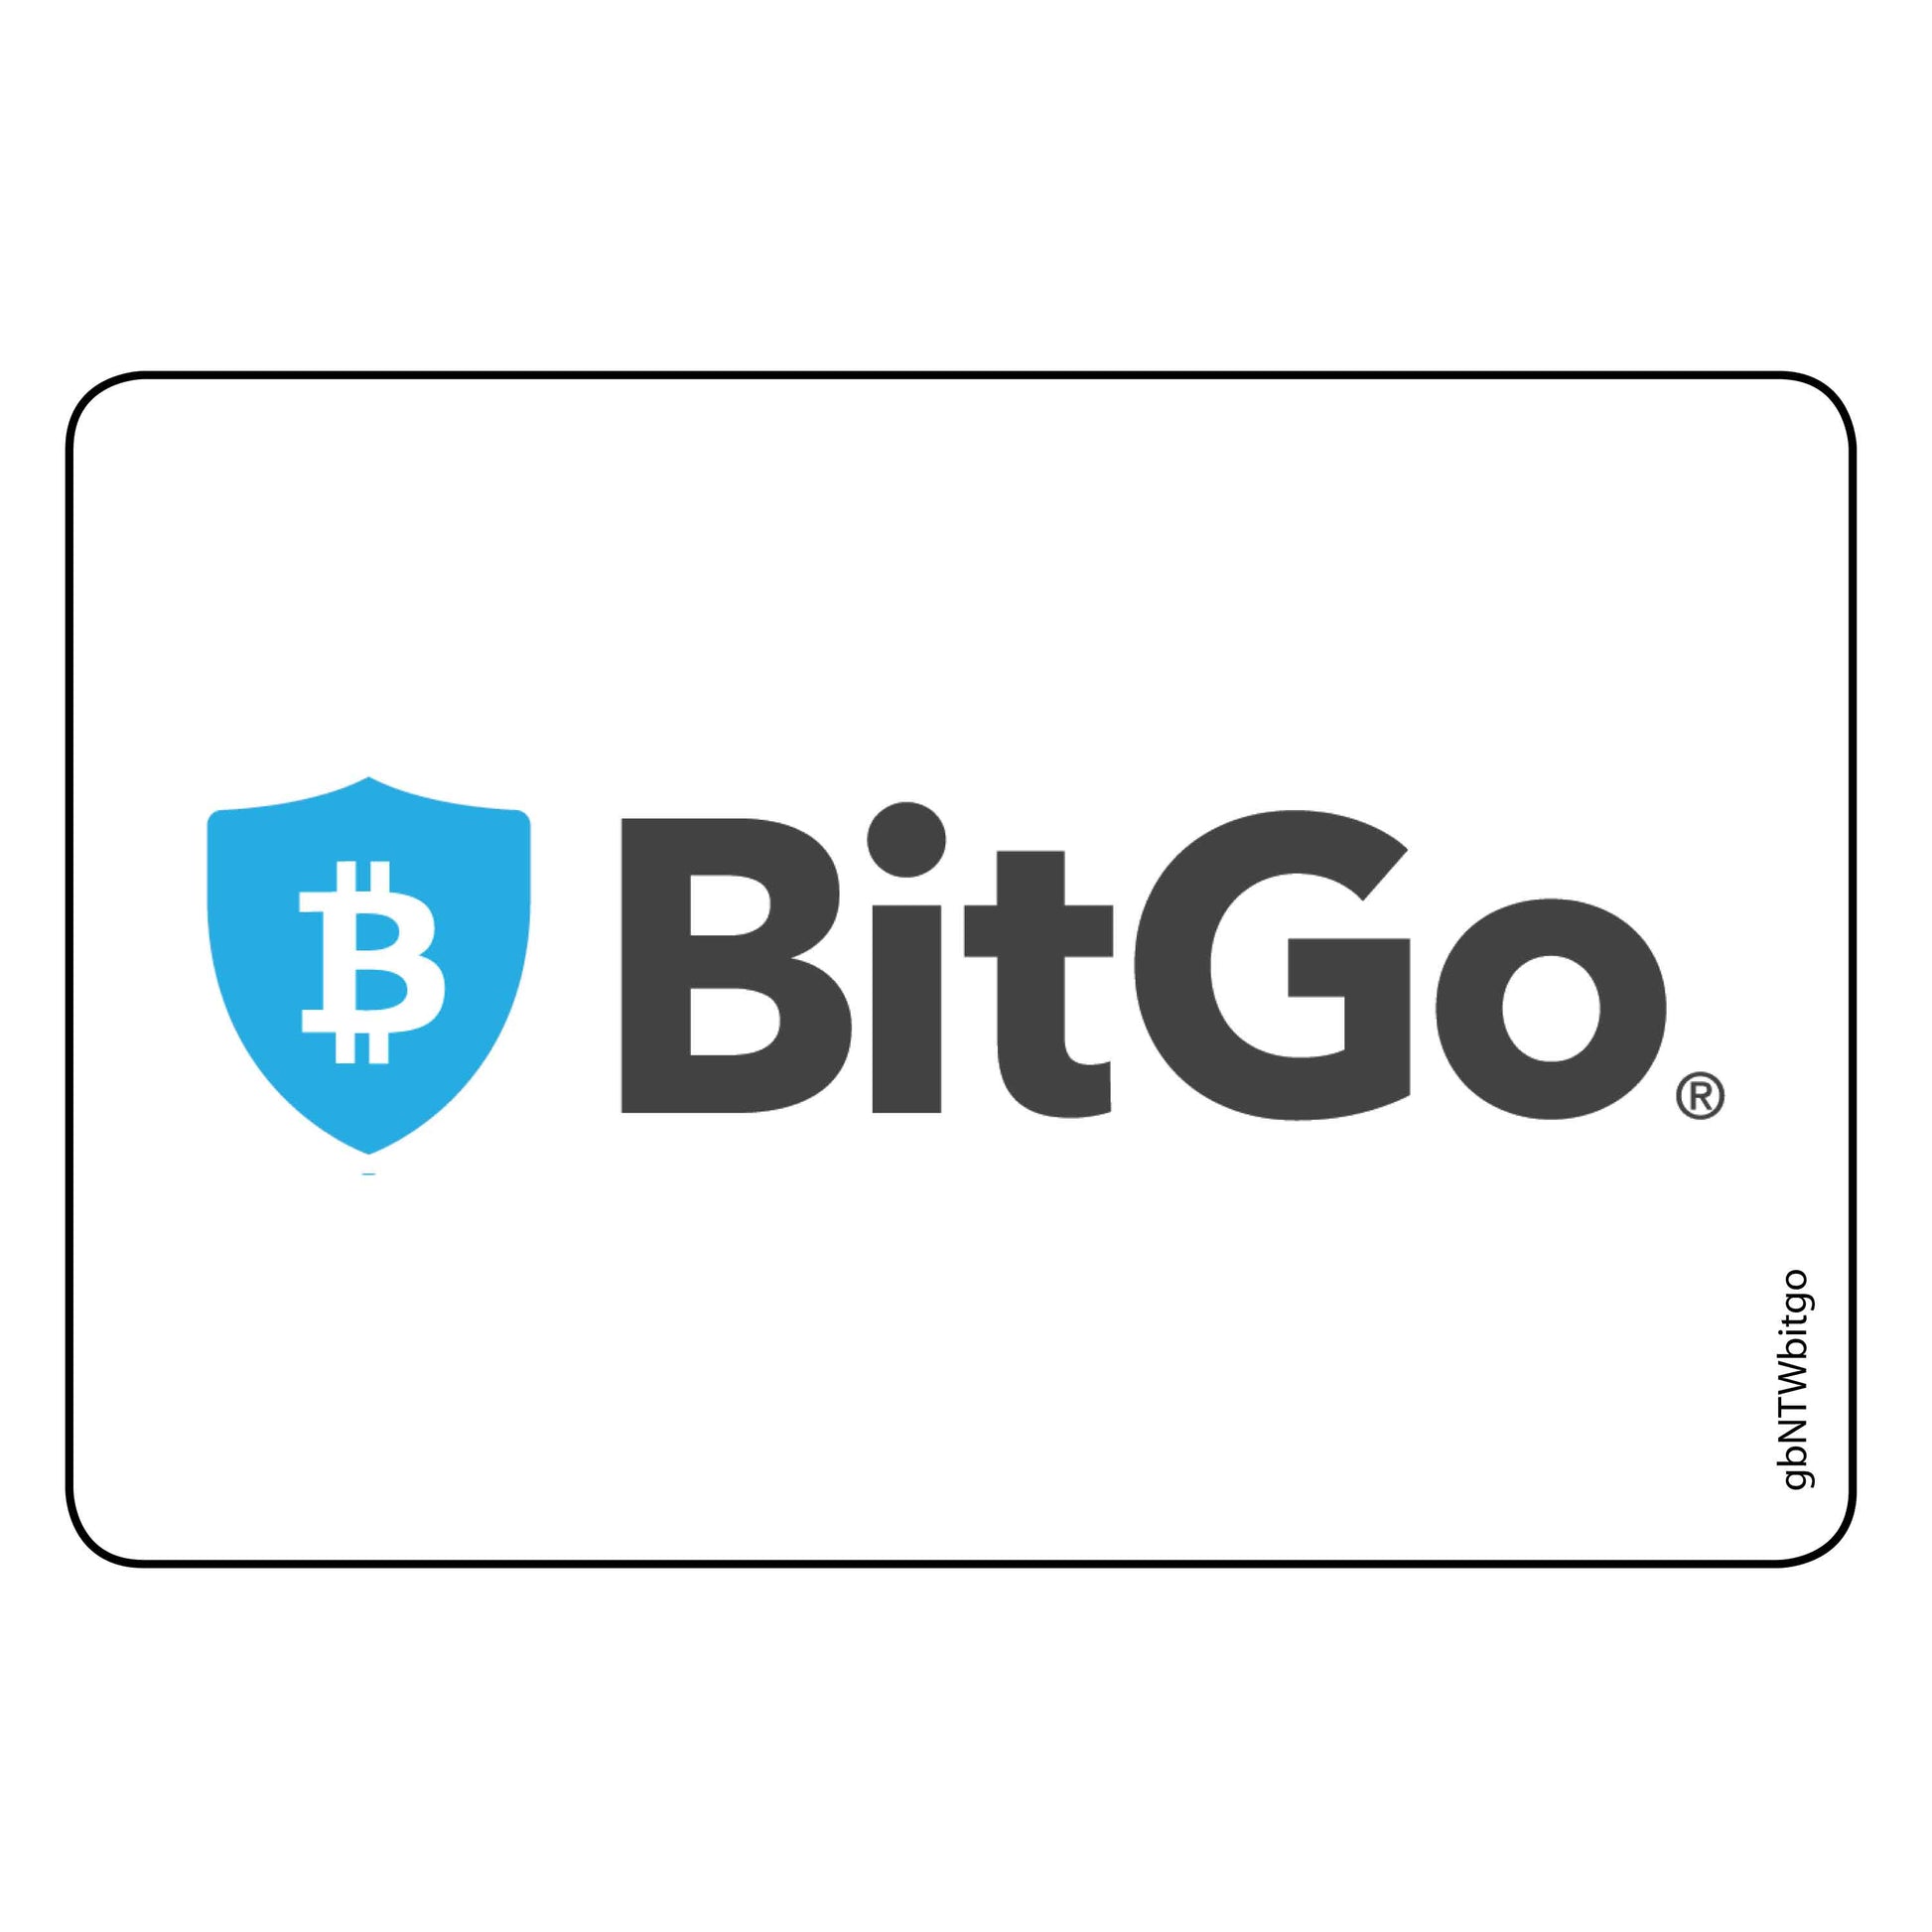 Single Network Decal, BitGo Decal. 3 inches by 2 inches in size.